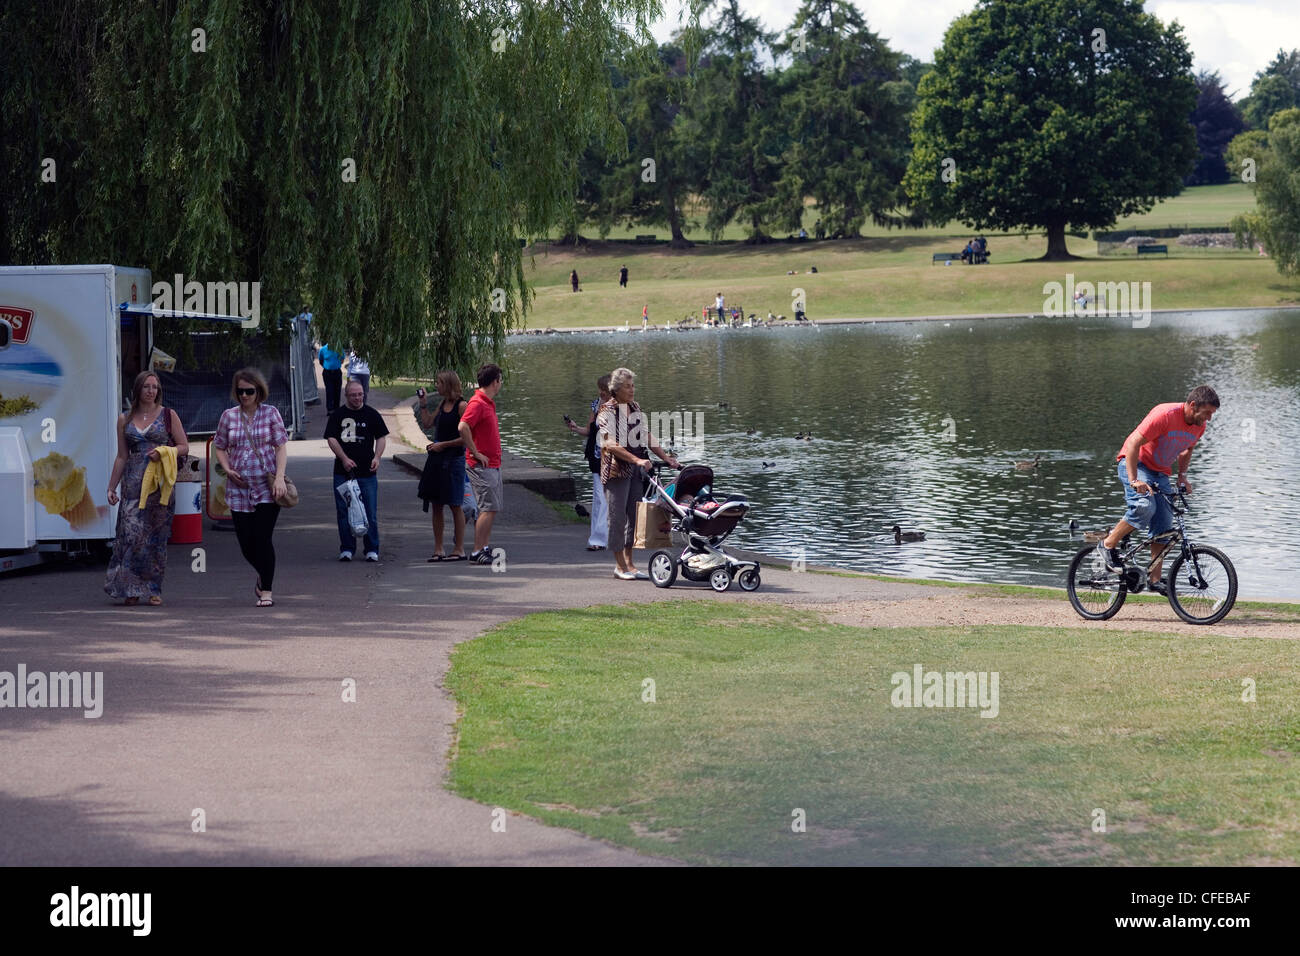 Verulamium Park. St. Albans. Hertfordshire. Home Counties; England. Summer weekend use of the park. Stock Photo